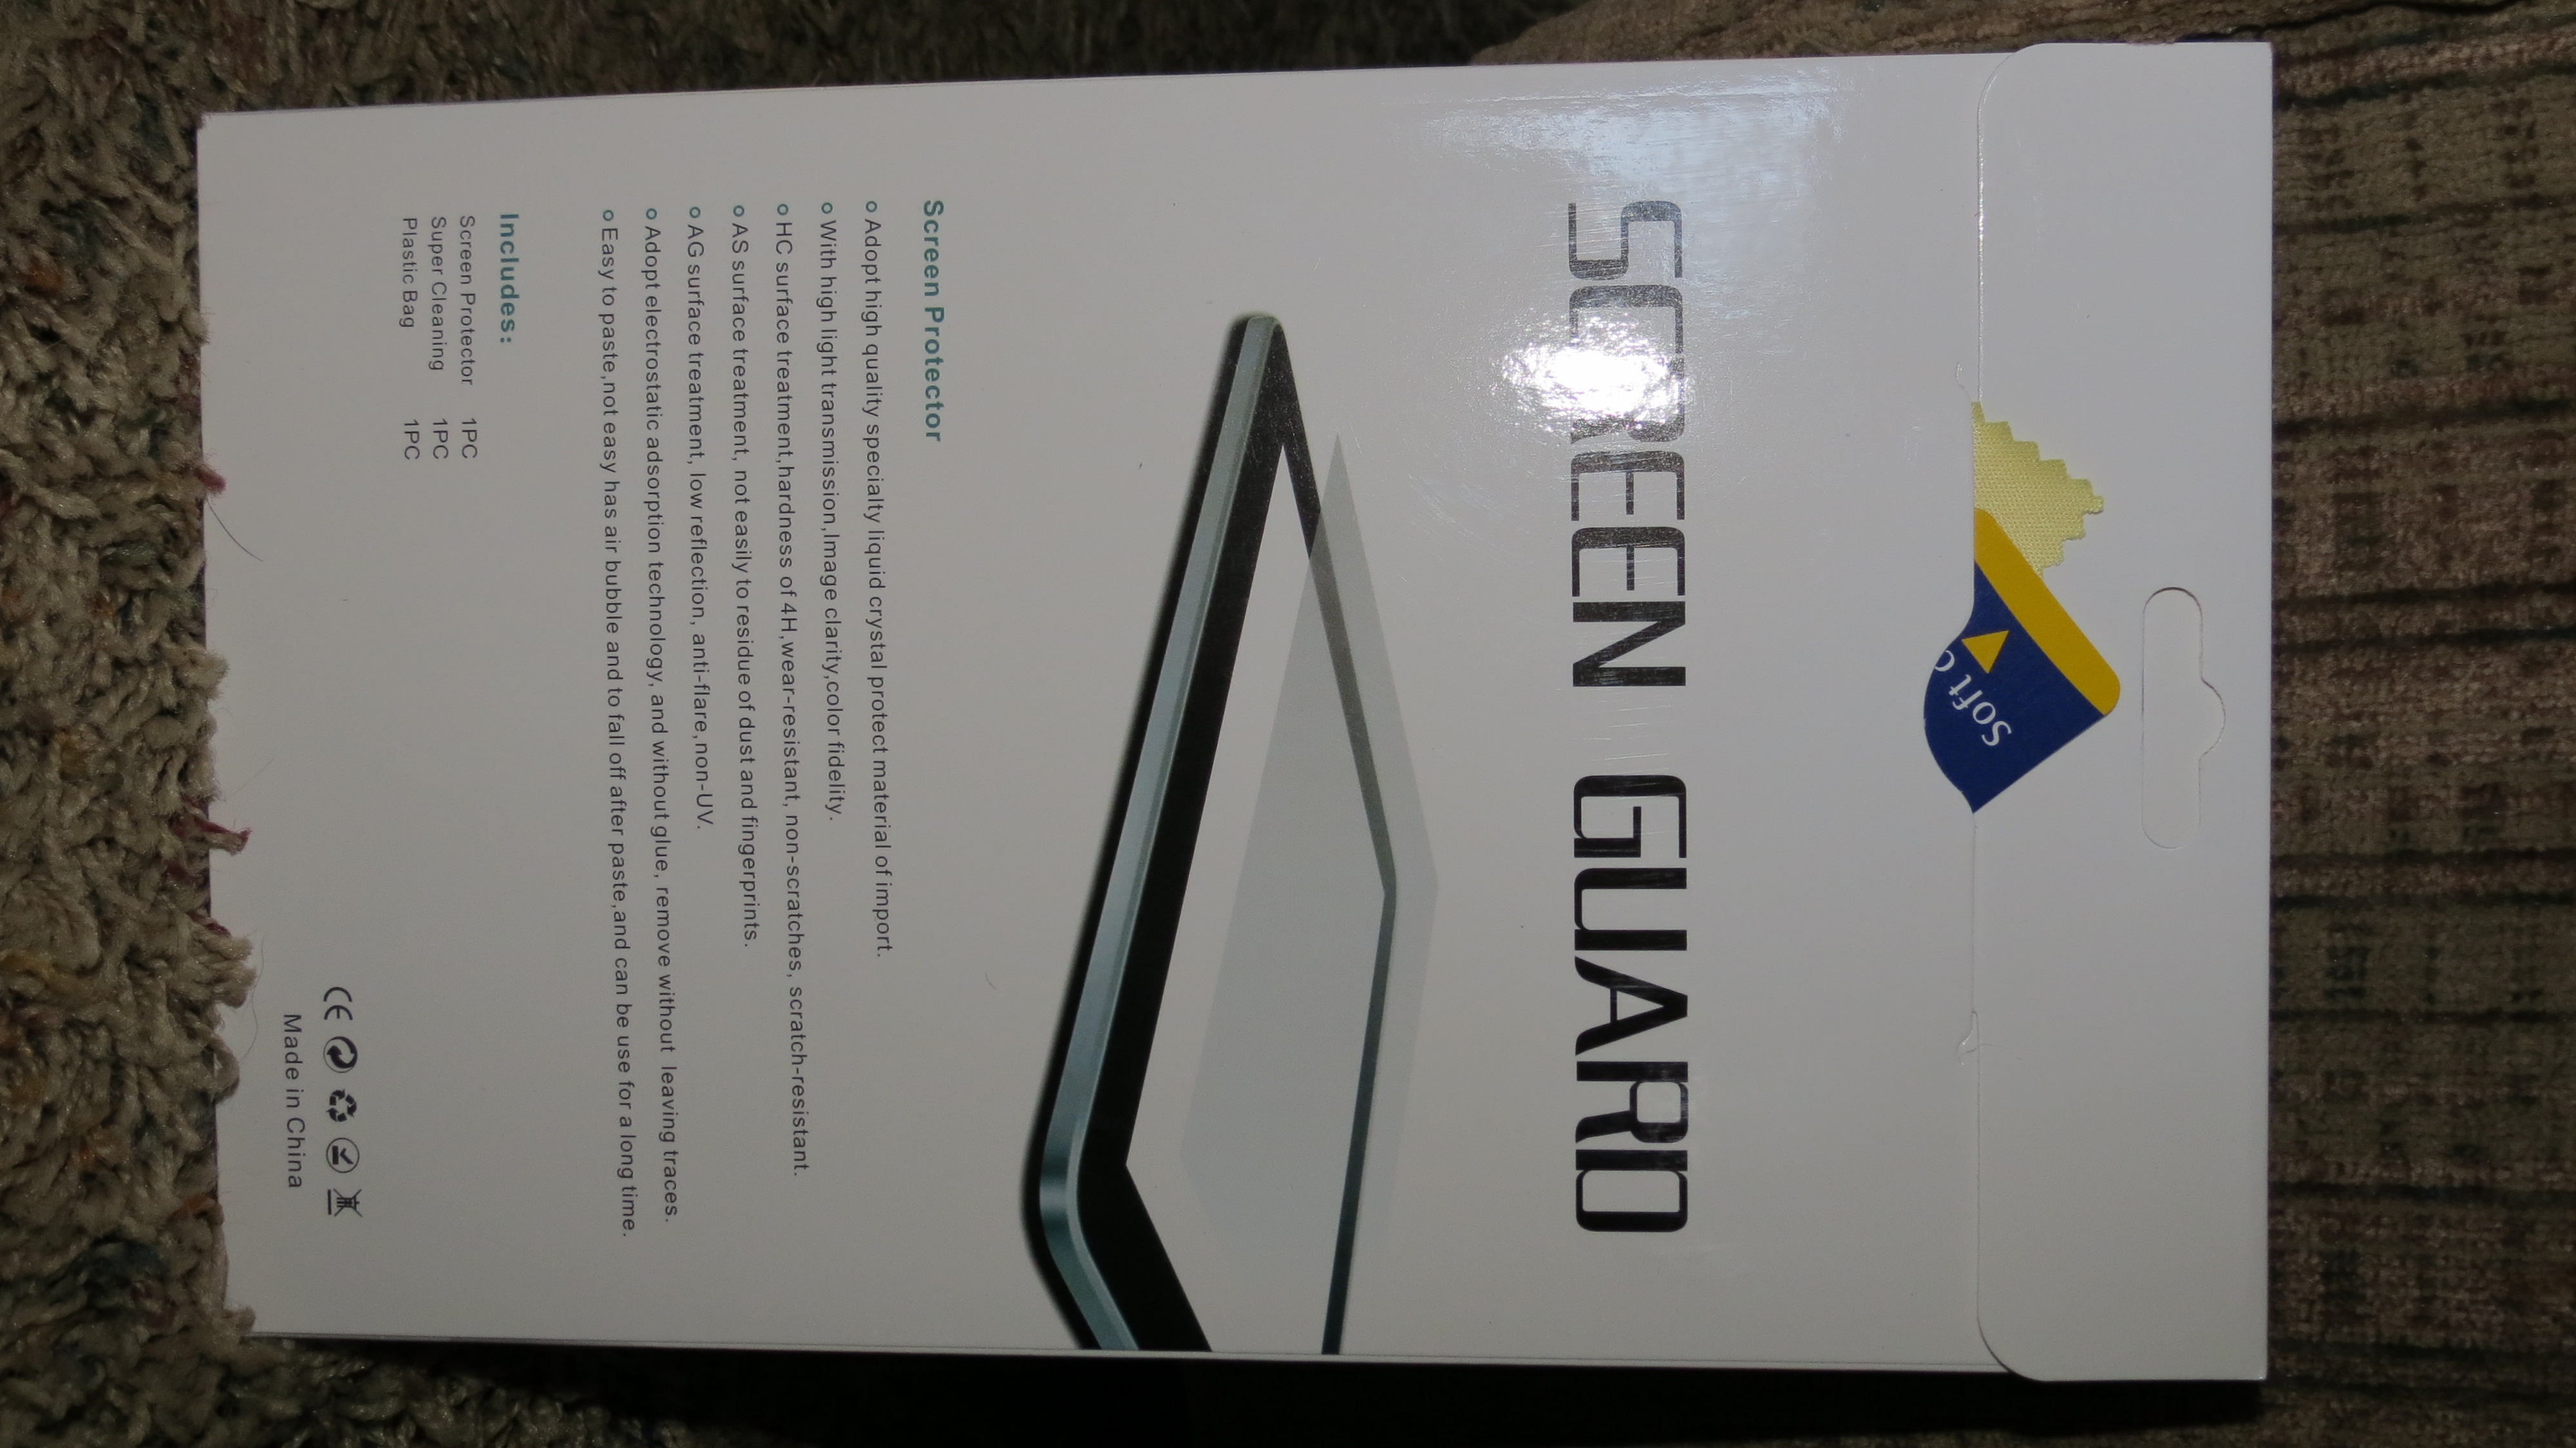 A nexus 7" Screen protector the wife ordered!  Love the translation!!